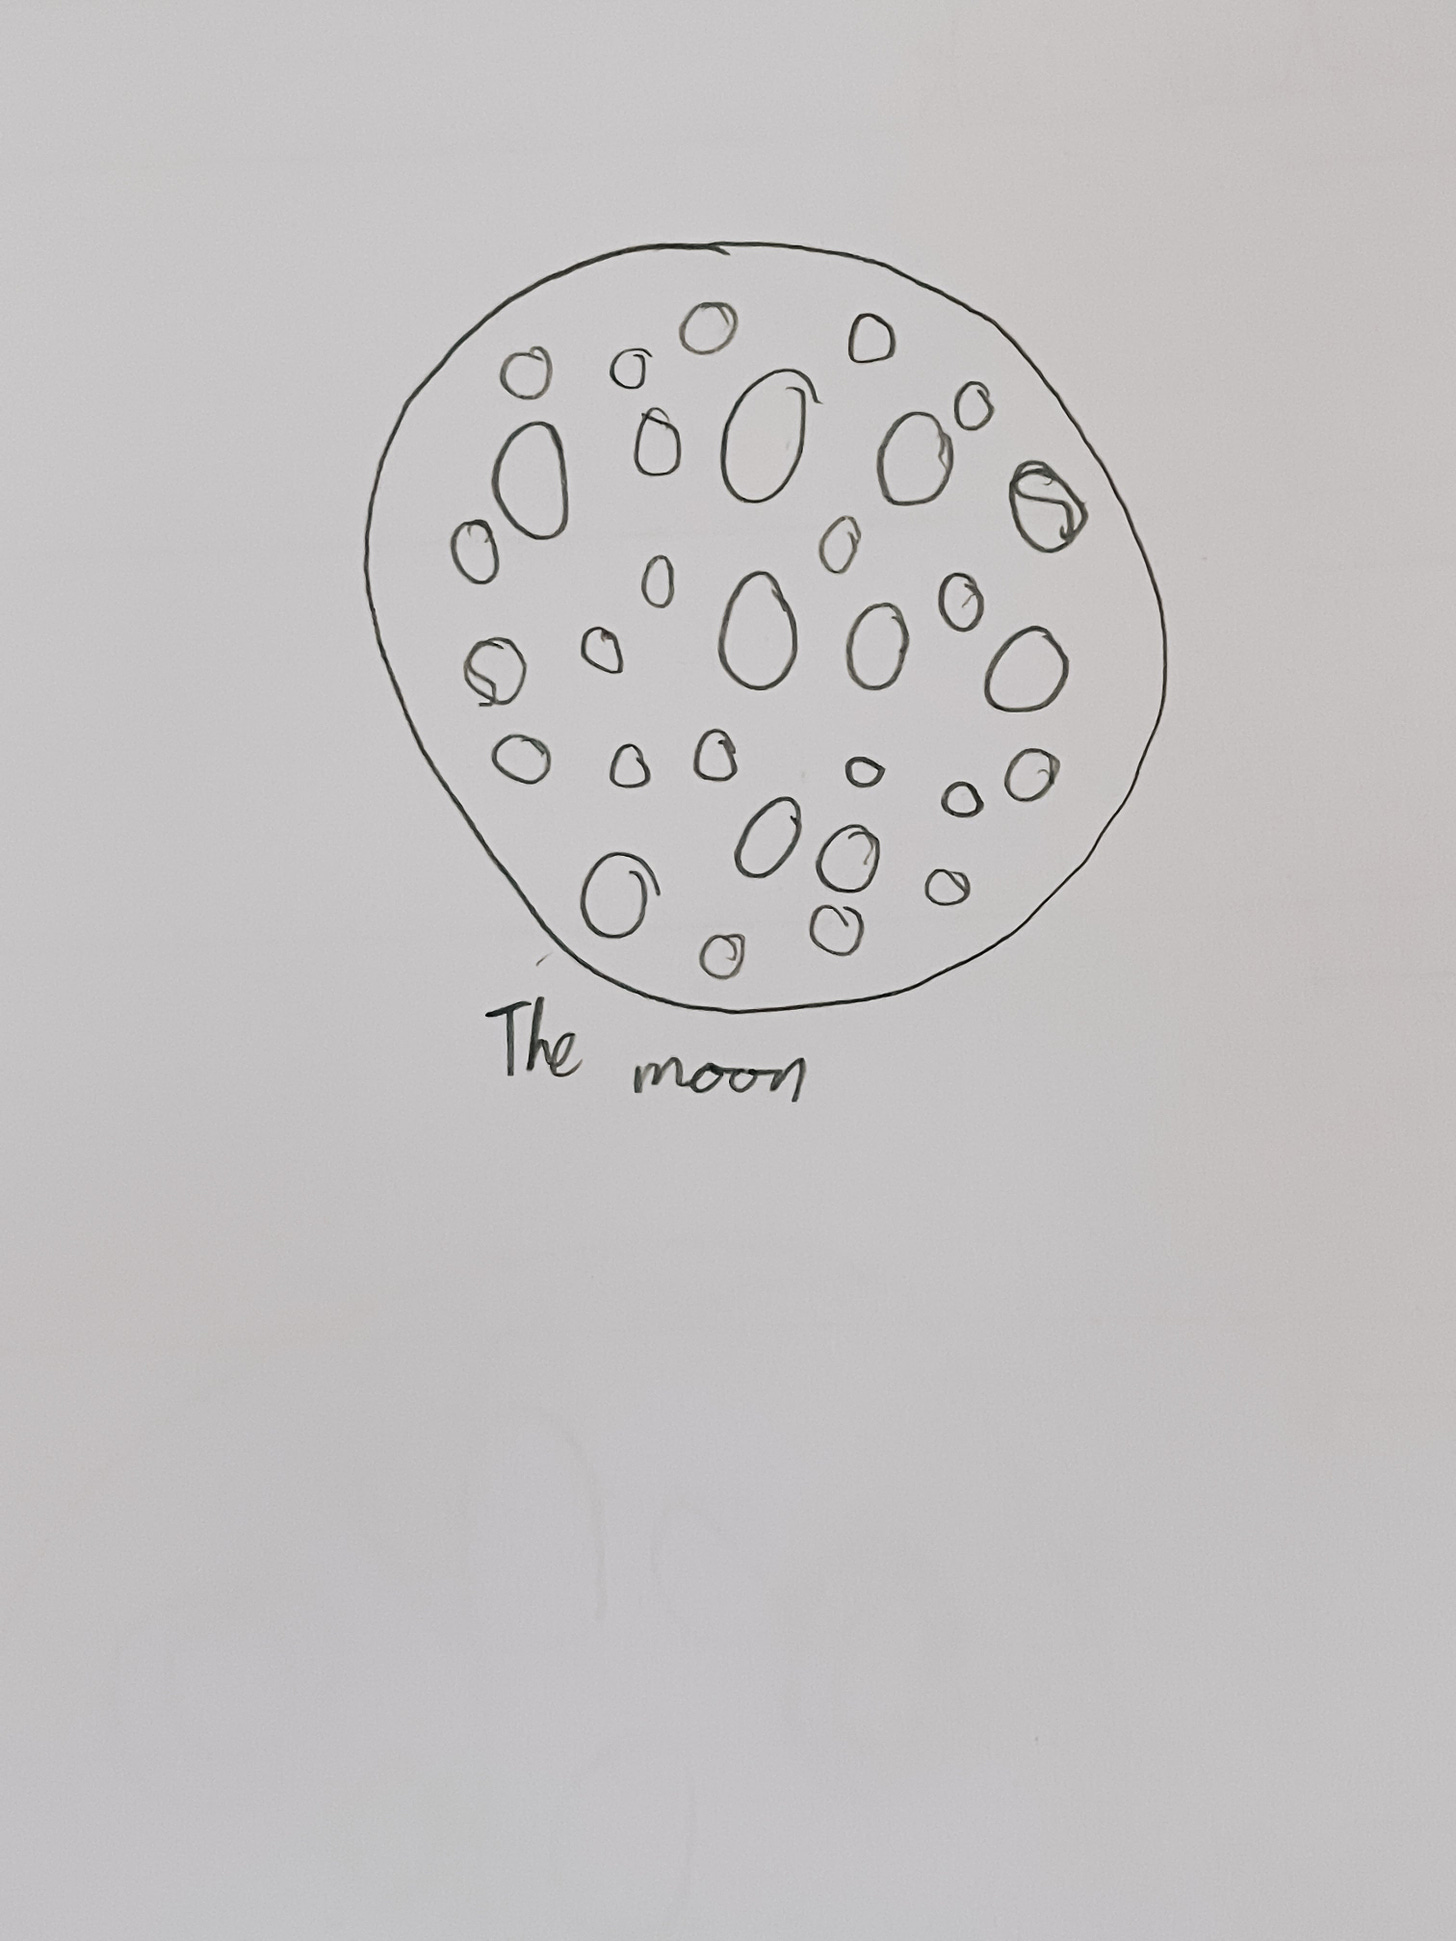 A child's pencil drawing of the moon with the caption "the moon" written underneath.